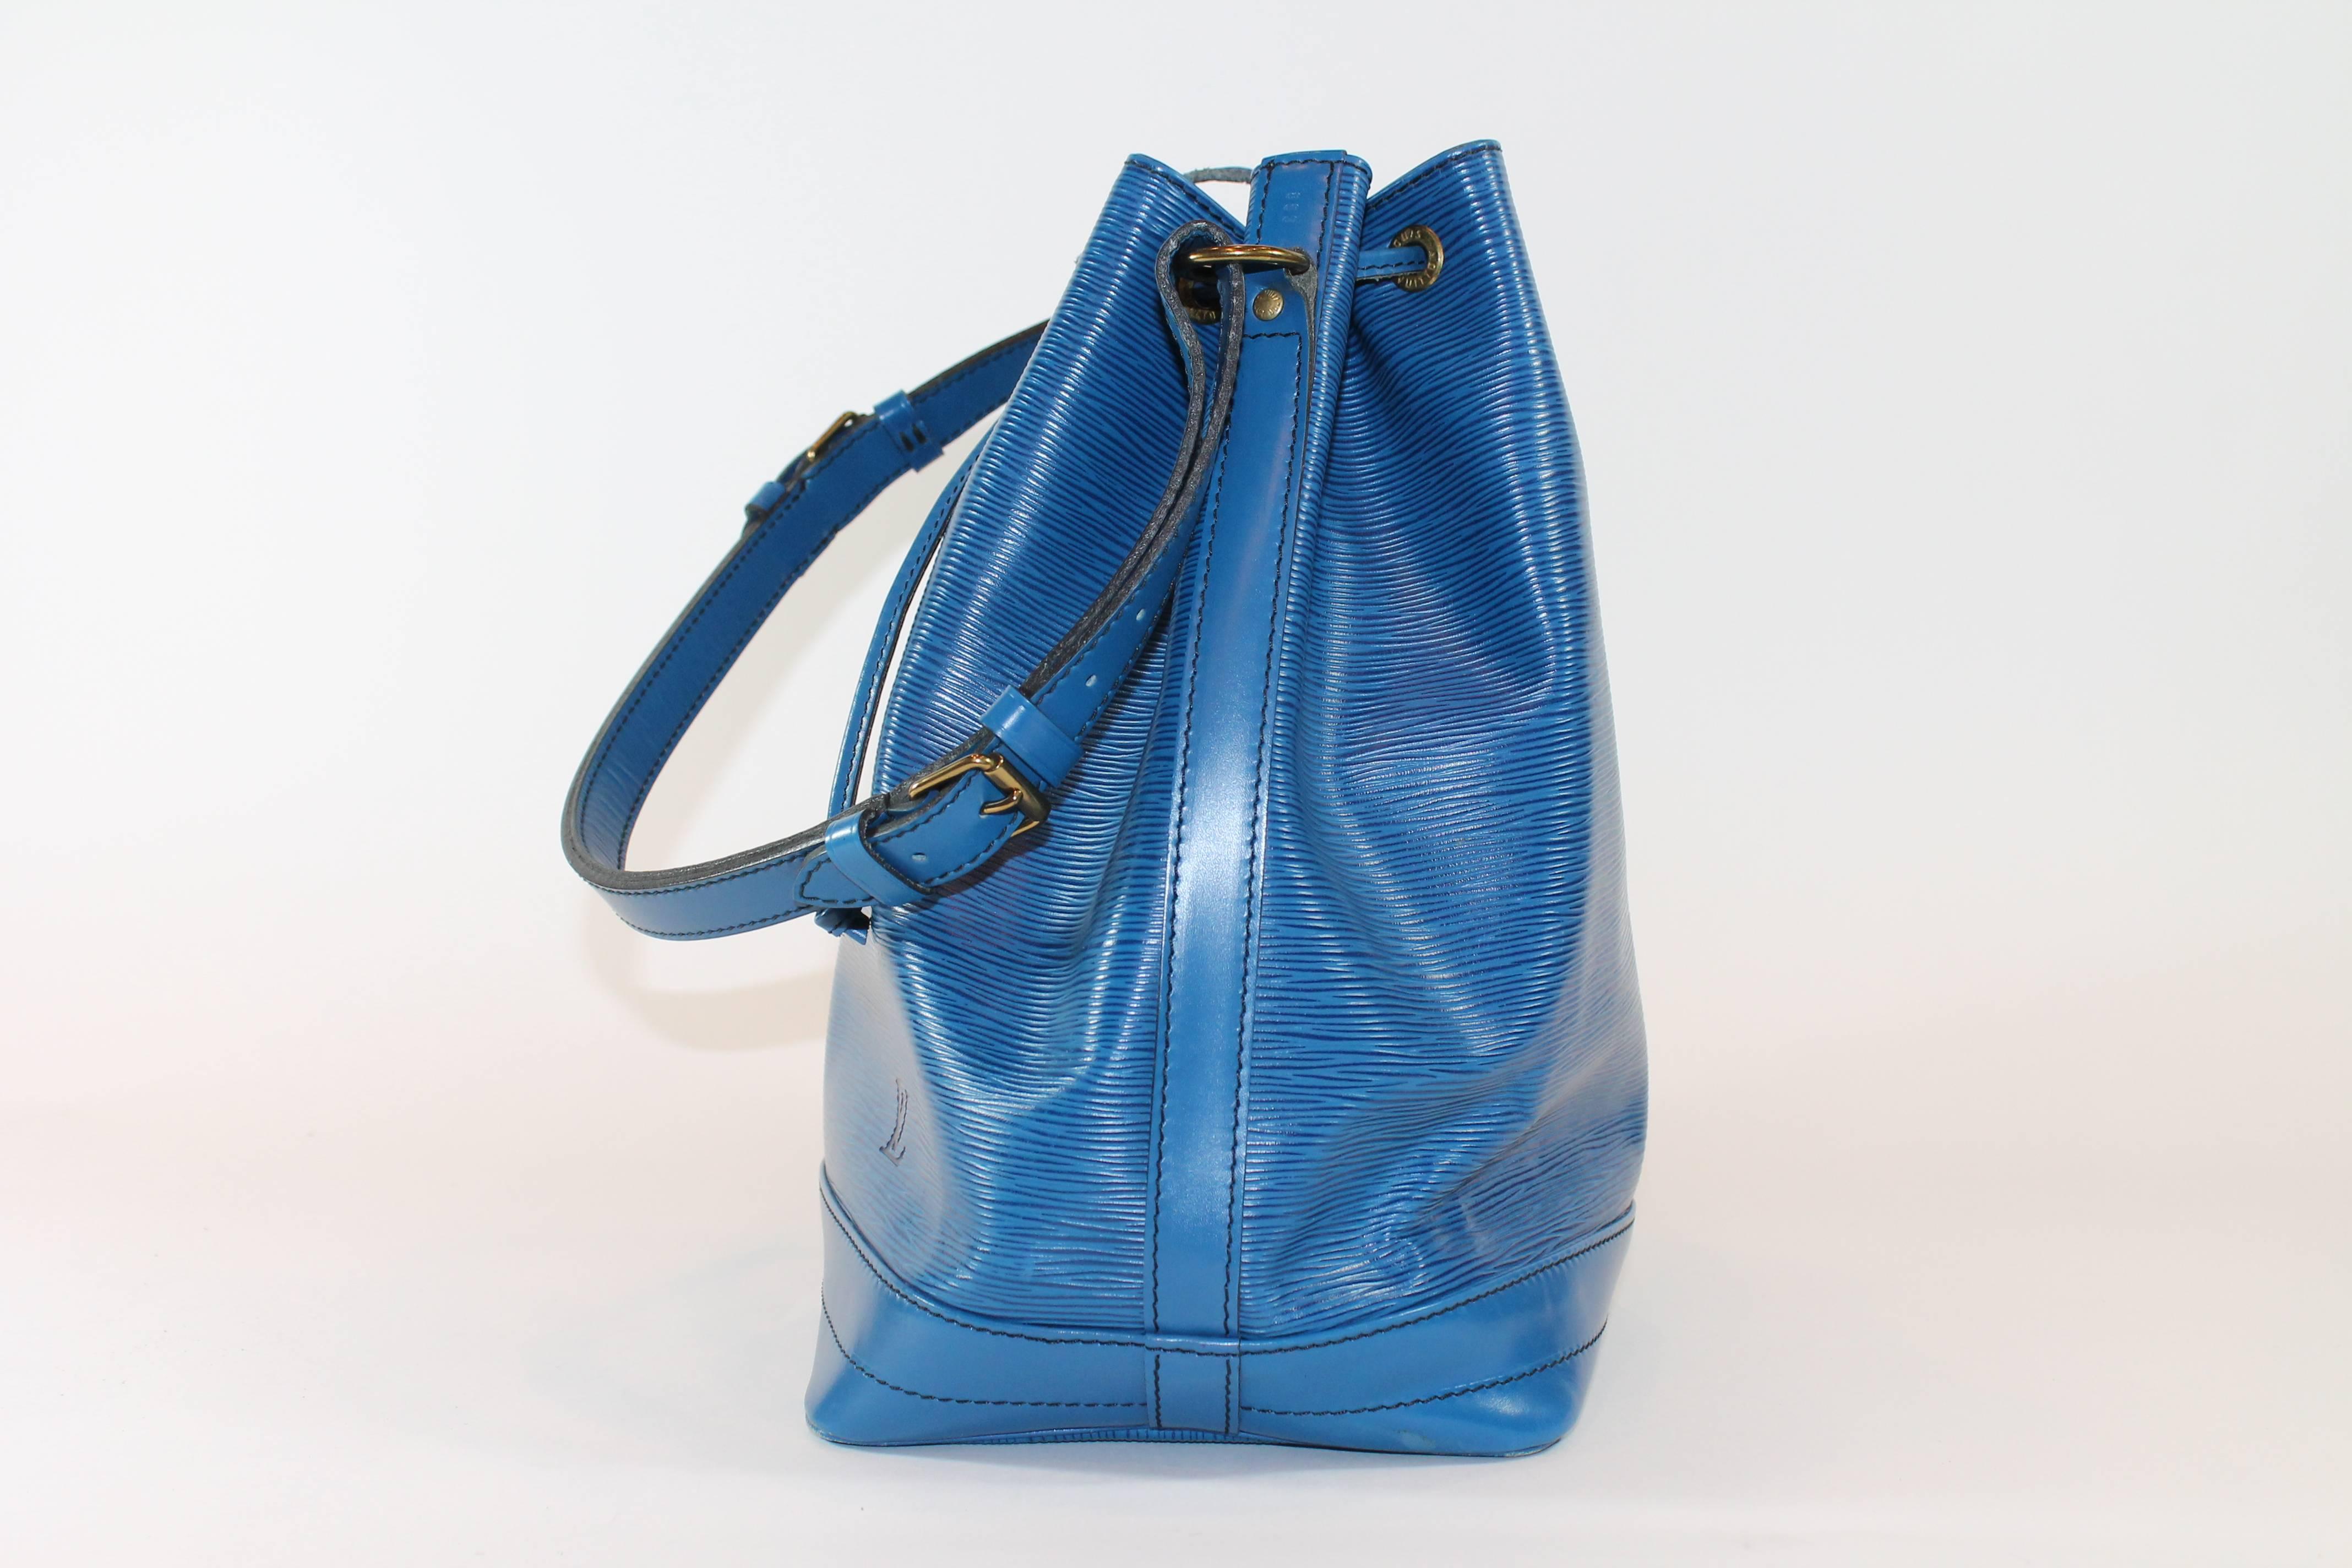 The Louis Vuitton bag is in cyan styled in Epi leather. This bag has brass hardware with an adjustable flat shoulder strap. It includes a drawstring closure at top. One interior pocket with zipper closure.